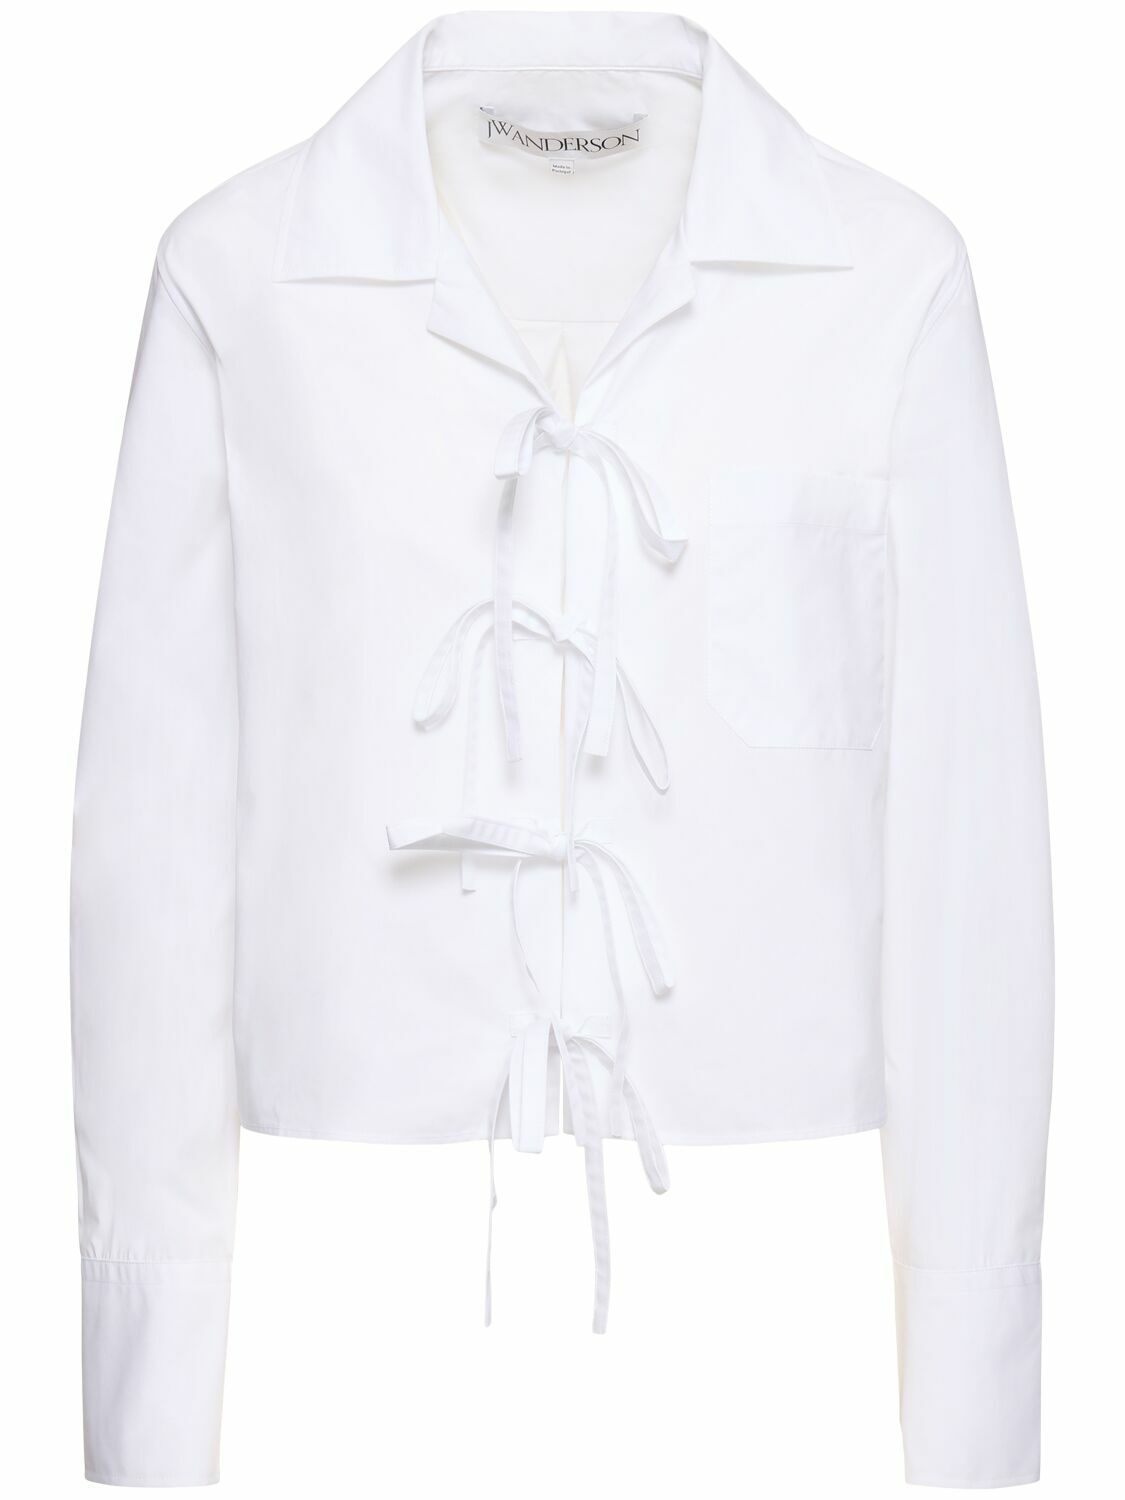 Photo: JW ANDERSON Bow Tie Cropped Shirt